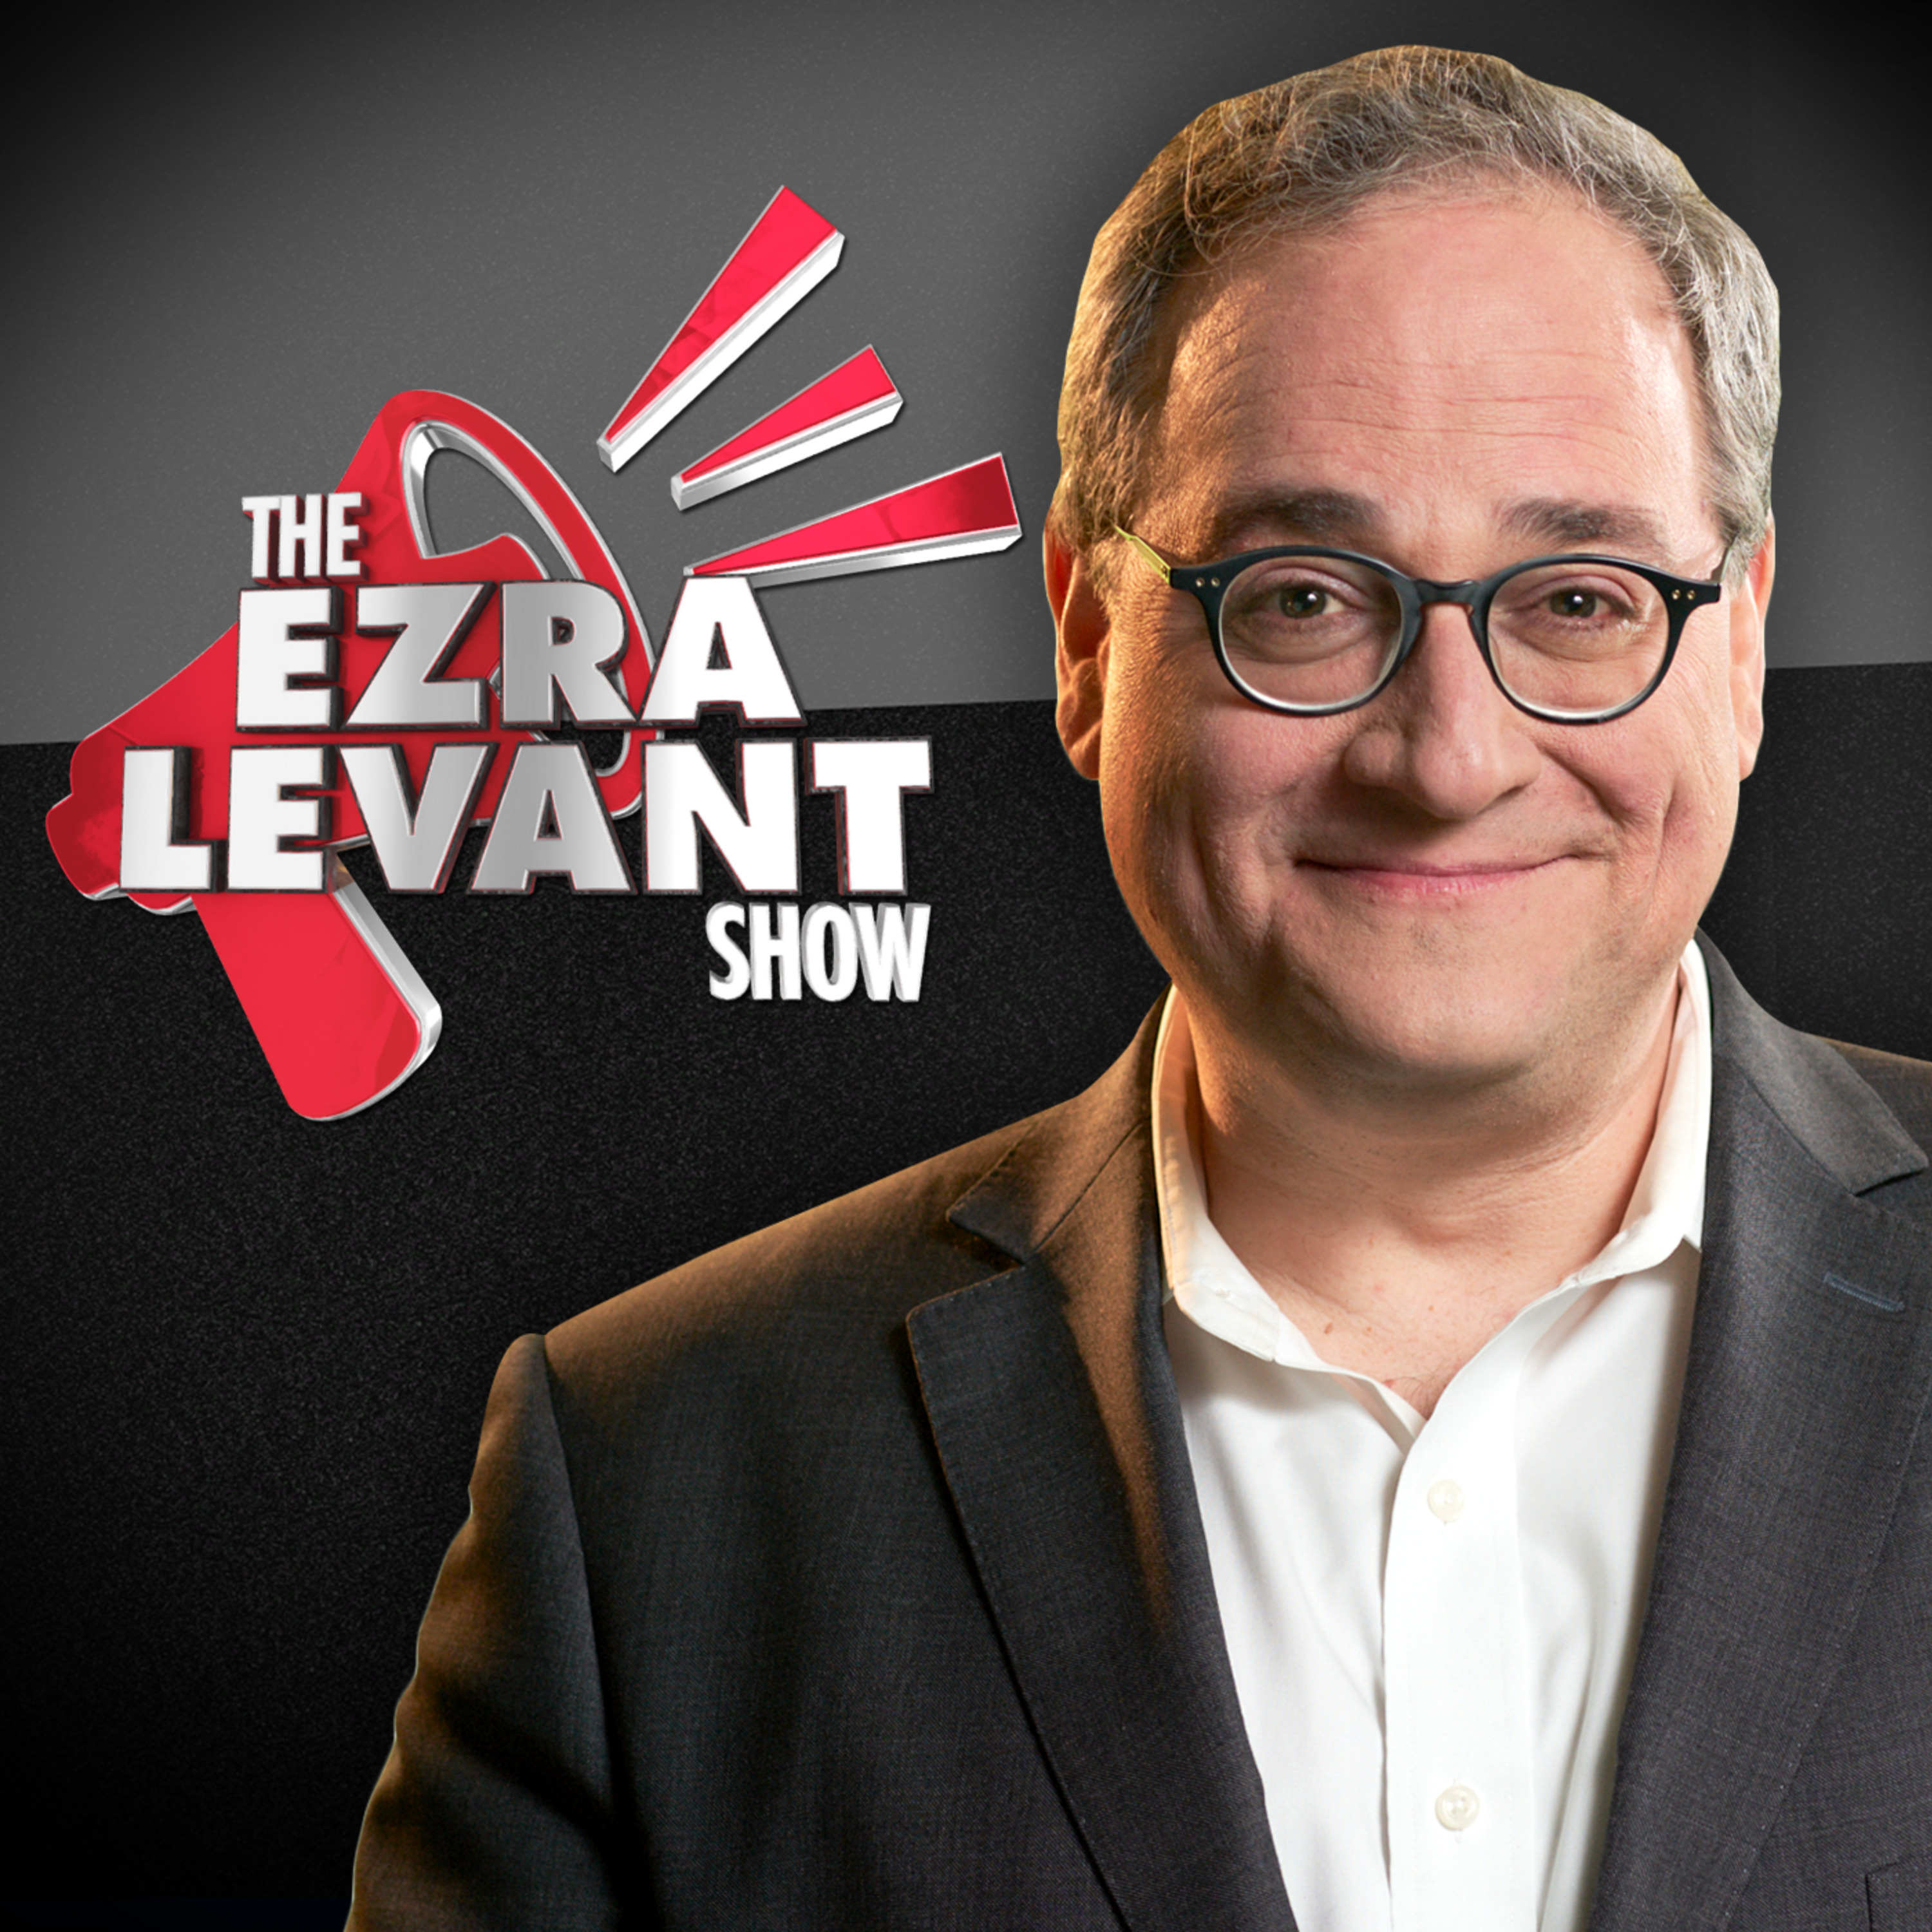 EZRA LEVANT | Our most rambunctious alumnus: An interview with Gavin McInnes